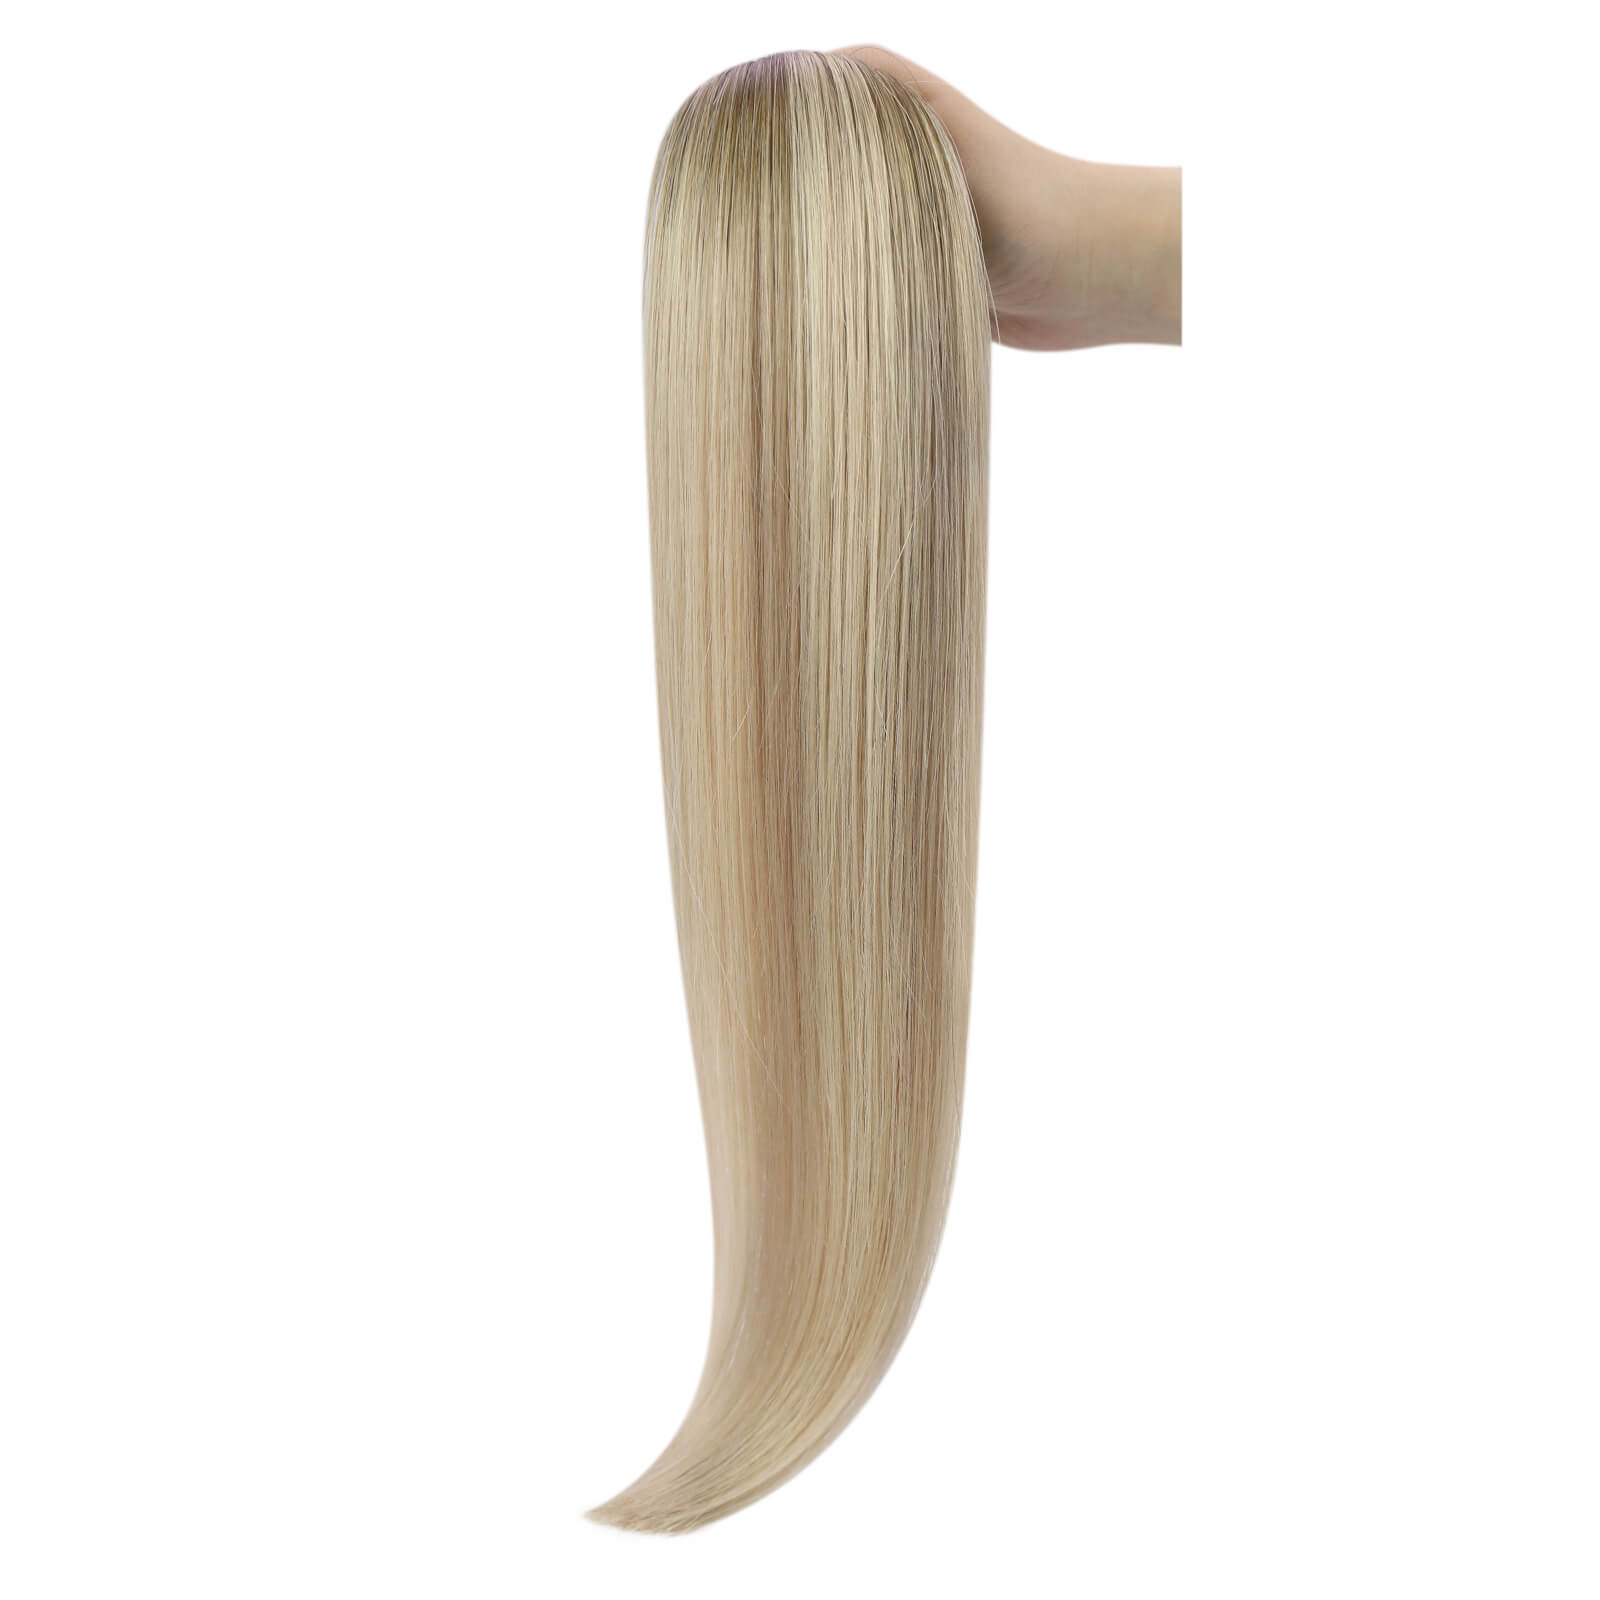 tape in extensions human hair,tape in human hair extensions,tape in hair extensions human hair,tape hair extensions,balayage hair extensions